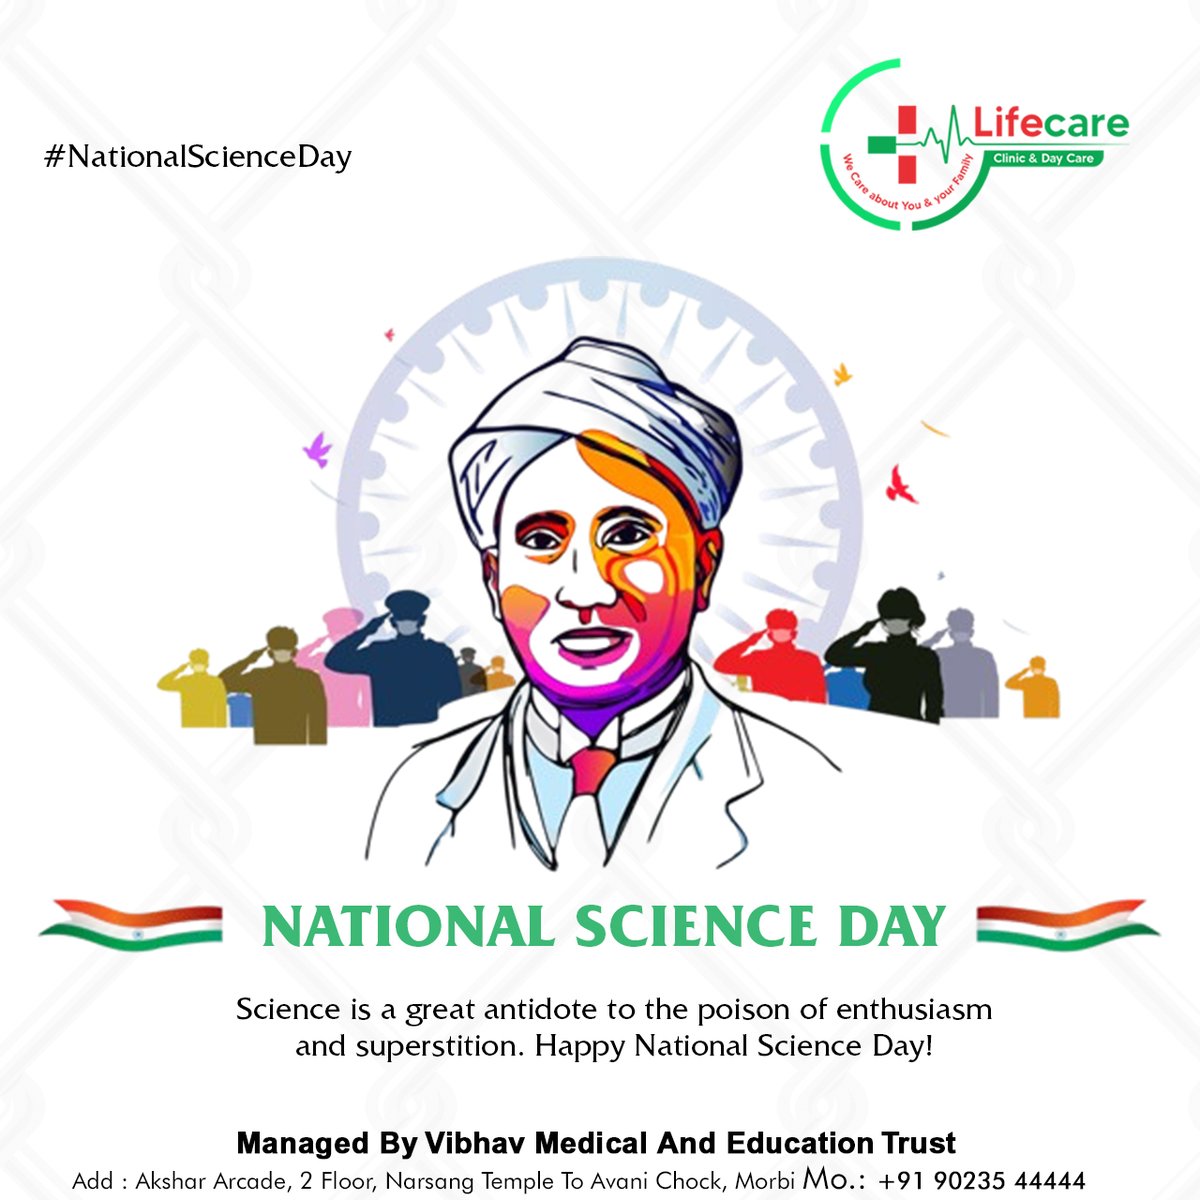 Happy National Science Day 2024! Let's invent new things and contribute to society's development.
@lifecareblood
.
.
#nationalscienceday #scienceday #cvraman #ramaneffect #biology #physics #vibhavmedical #education #trust   #donation #socialwork  #rajkot #morbi #gujarat #india